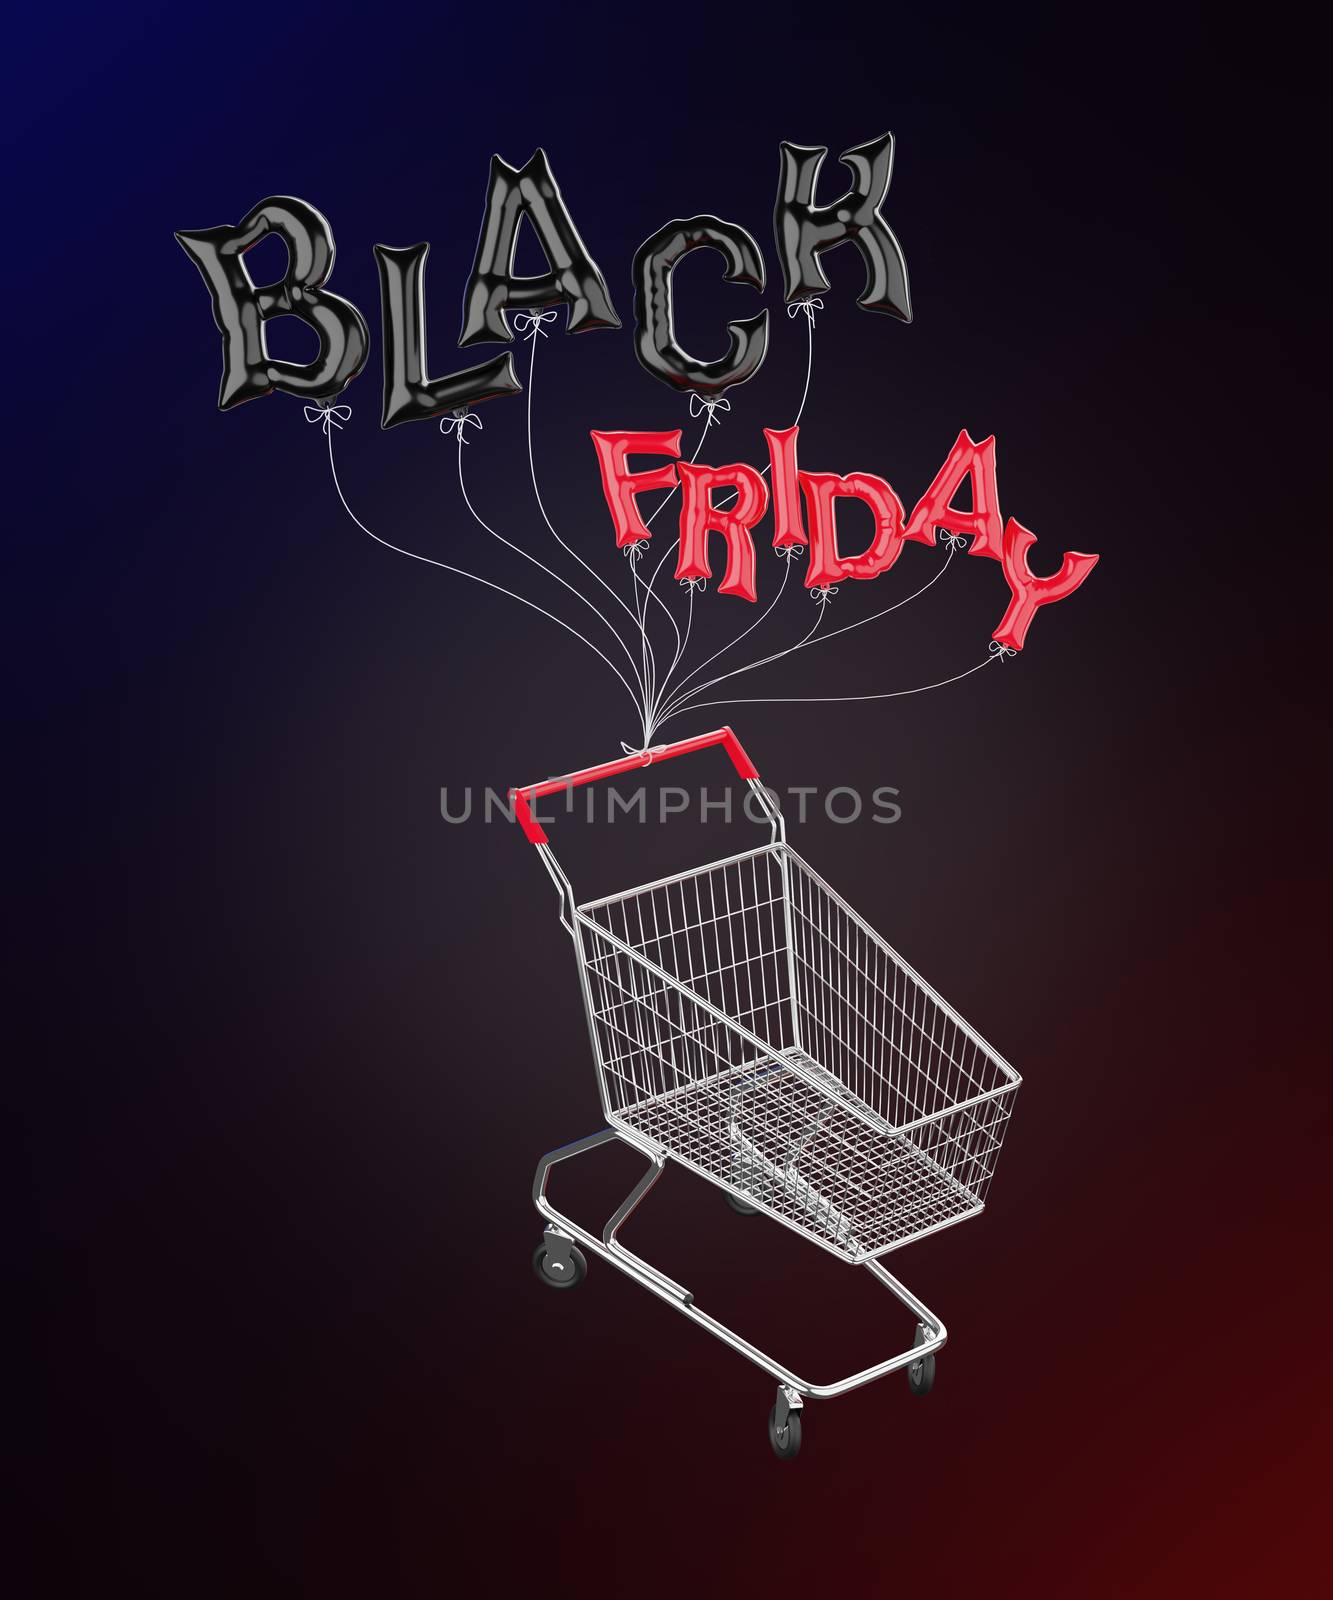 Balloons in the shape of the letters "Black Friday" is tied to a shopping cart and are floating in a black background. Concept of the shopping season on weekends of November every year. 3D rendering.